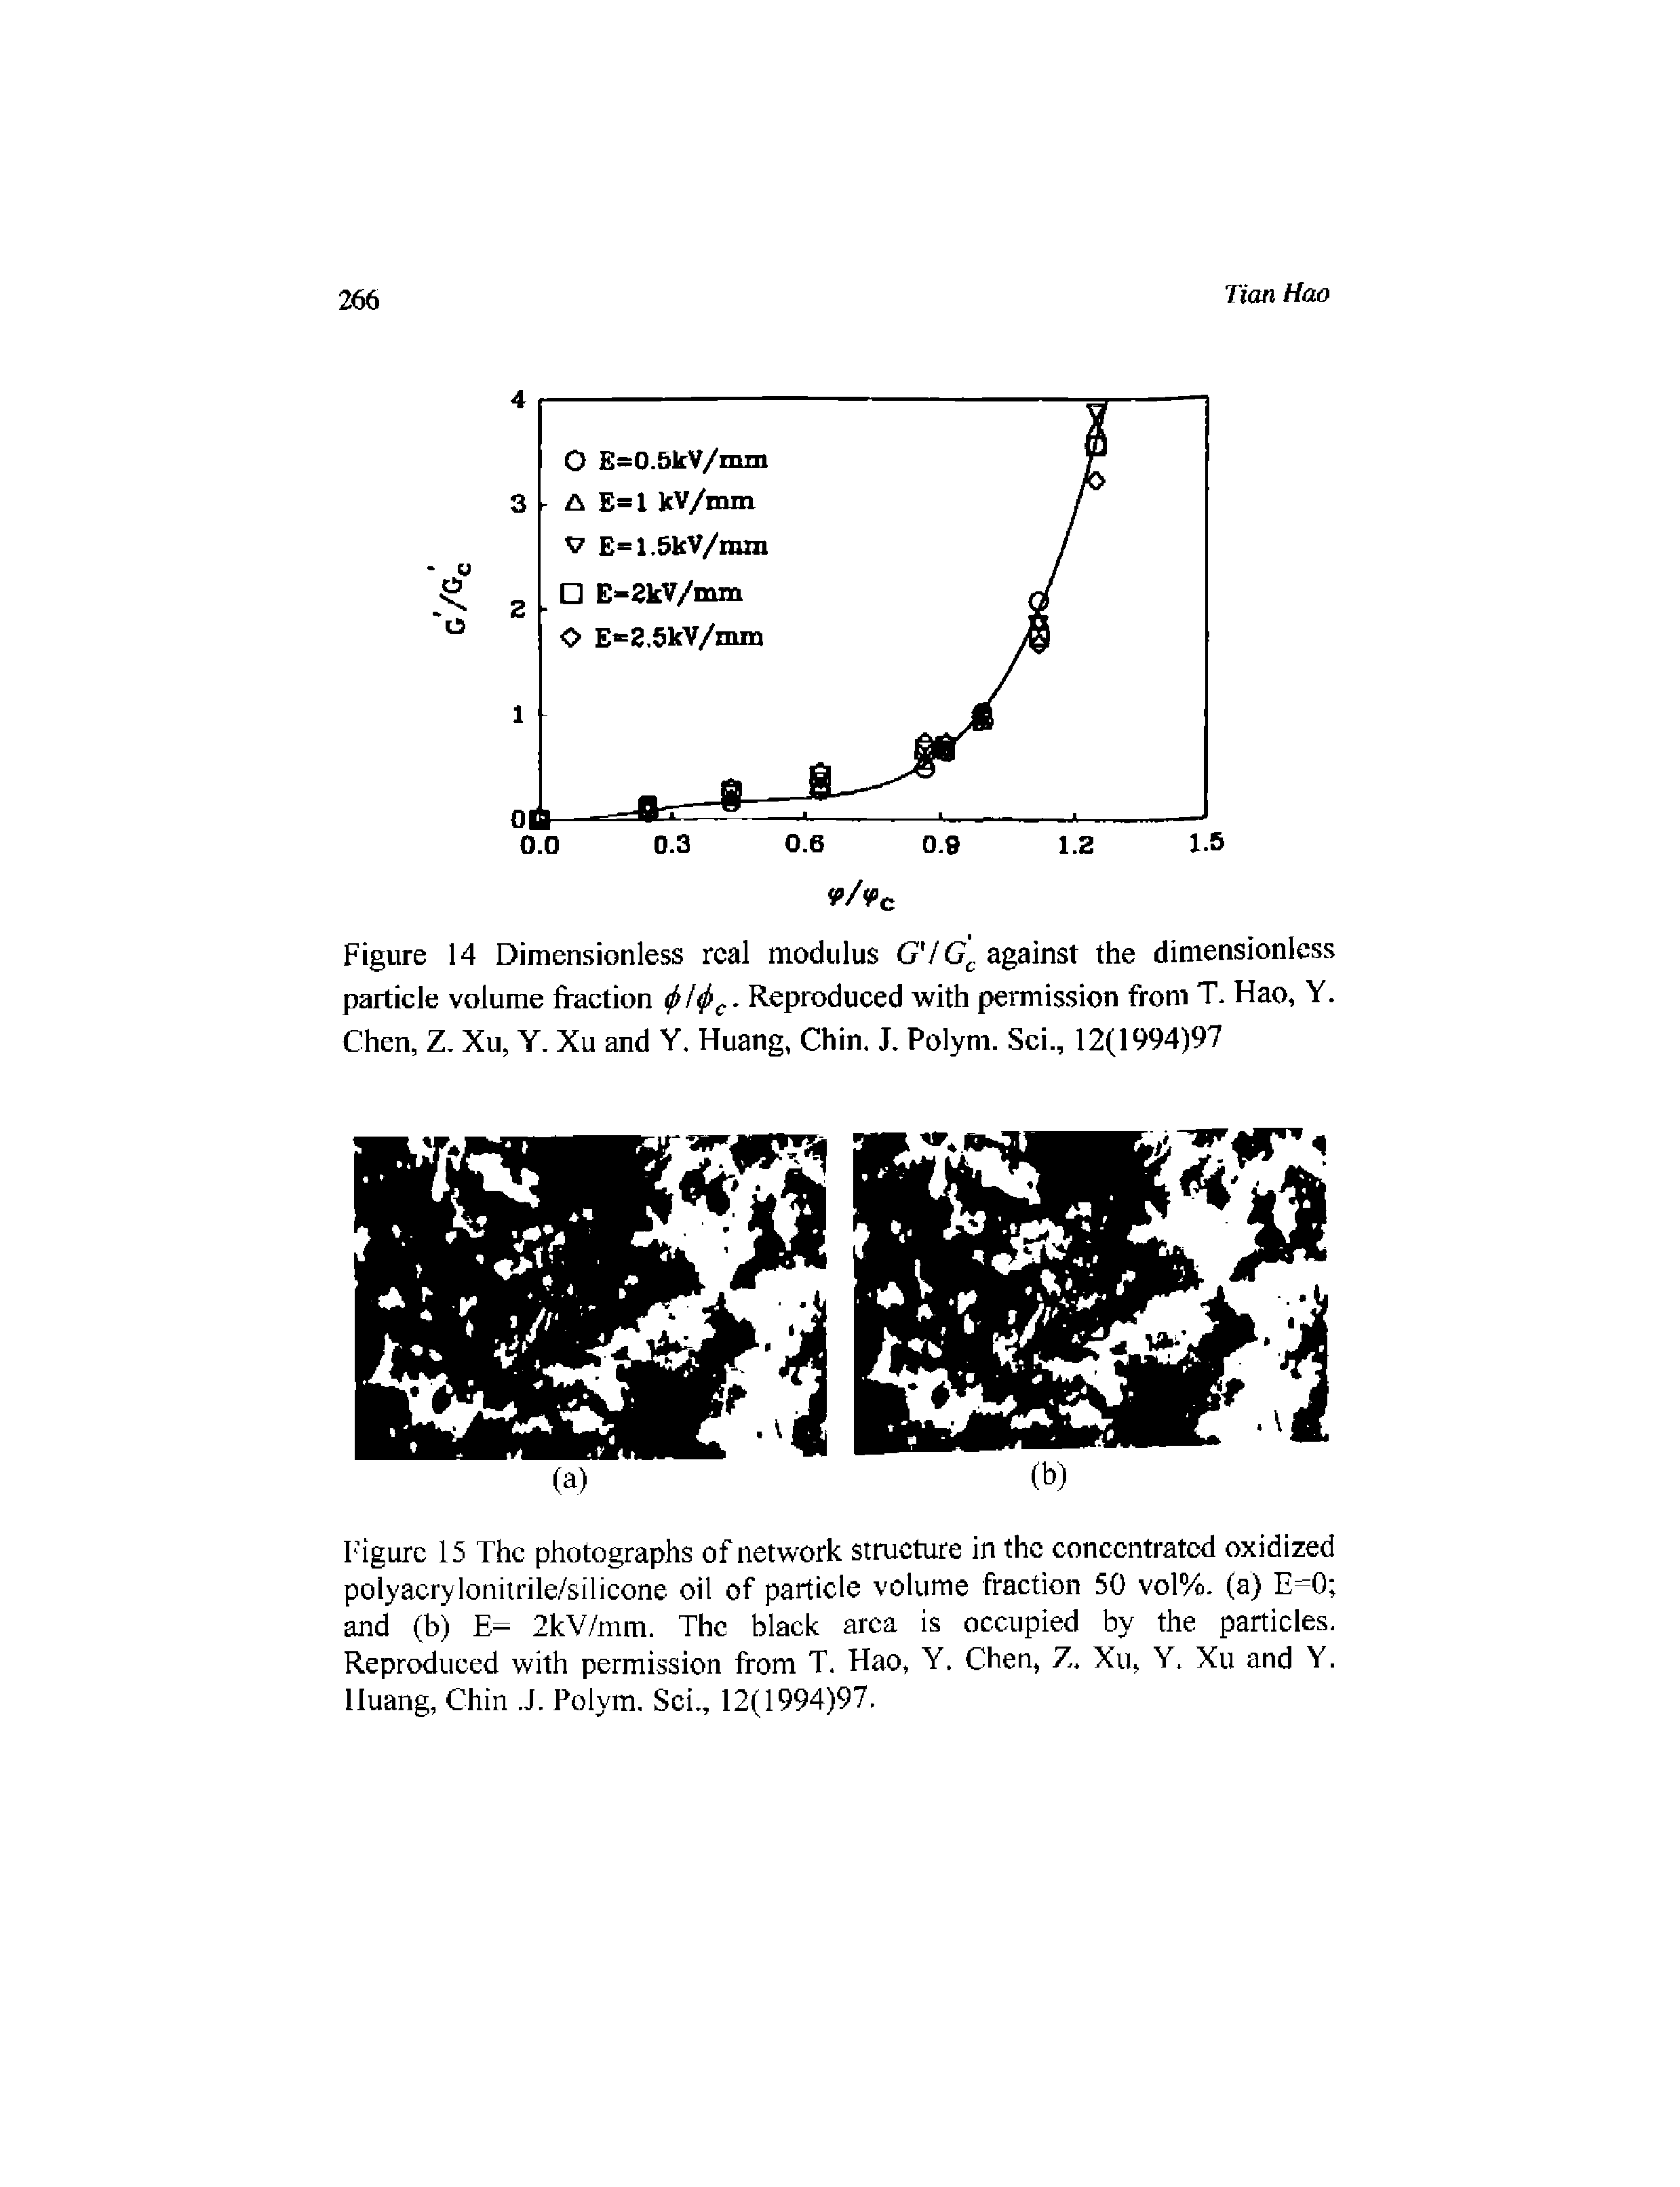 Figure 14 Dimensionless real modulus G7 against the dimensionless particle volume fraction c- Reproduced with permission from T. Hao, Y. Chen, Z. Xu, Y. Xu and Y. Huang, Chin. J. Polym. Sci., 12(1994)97...